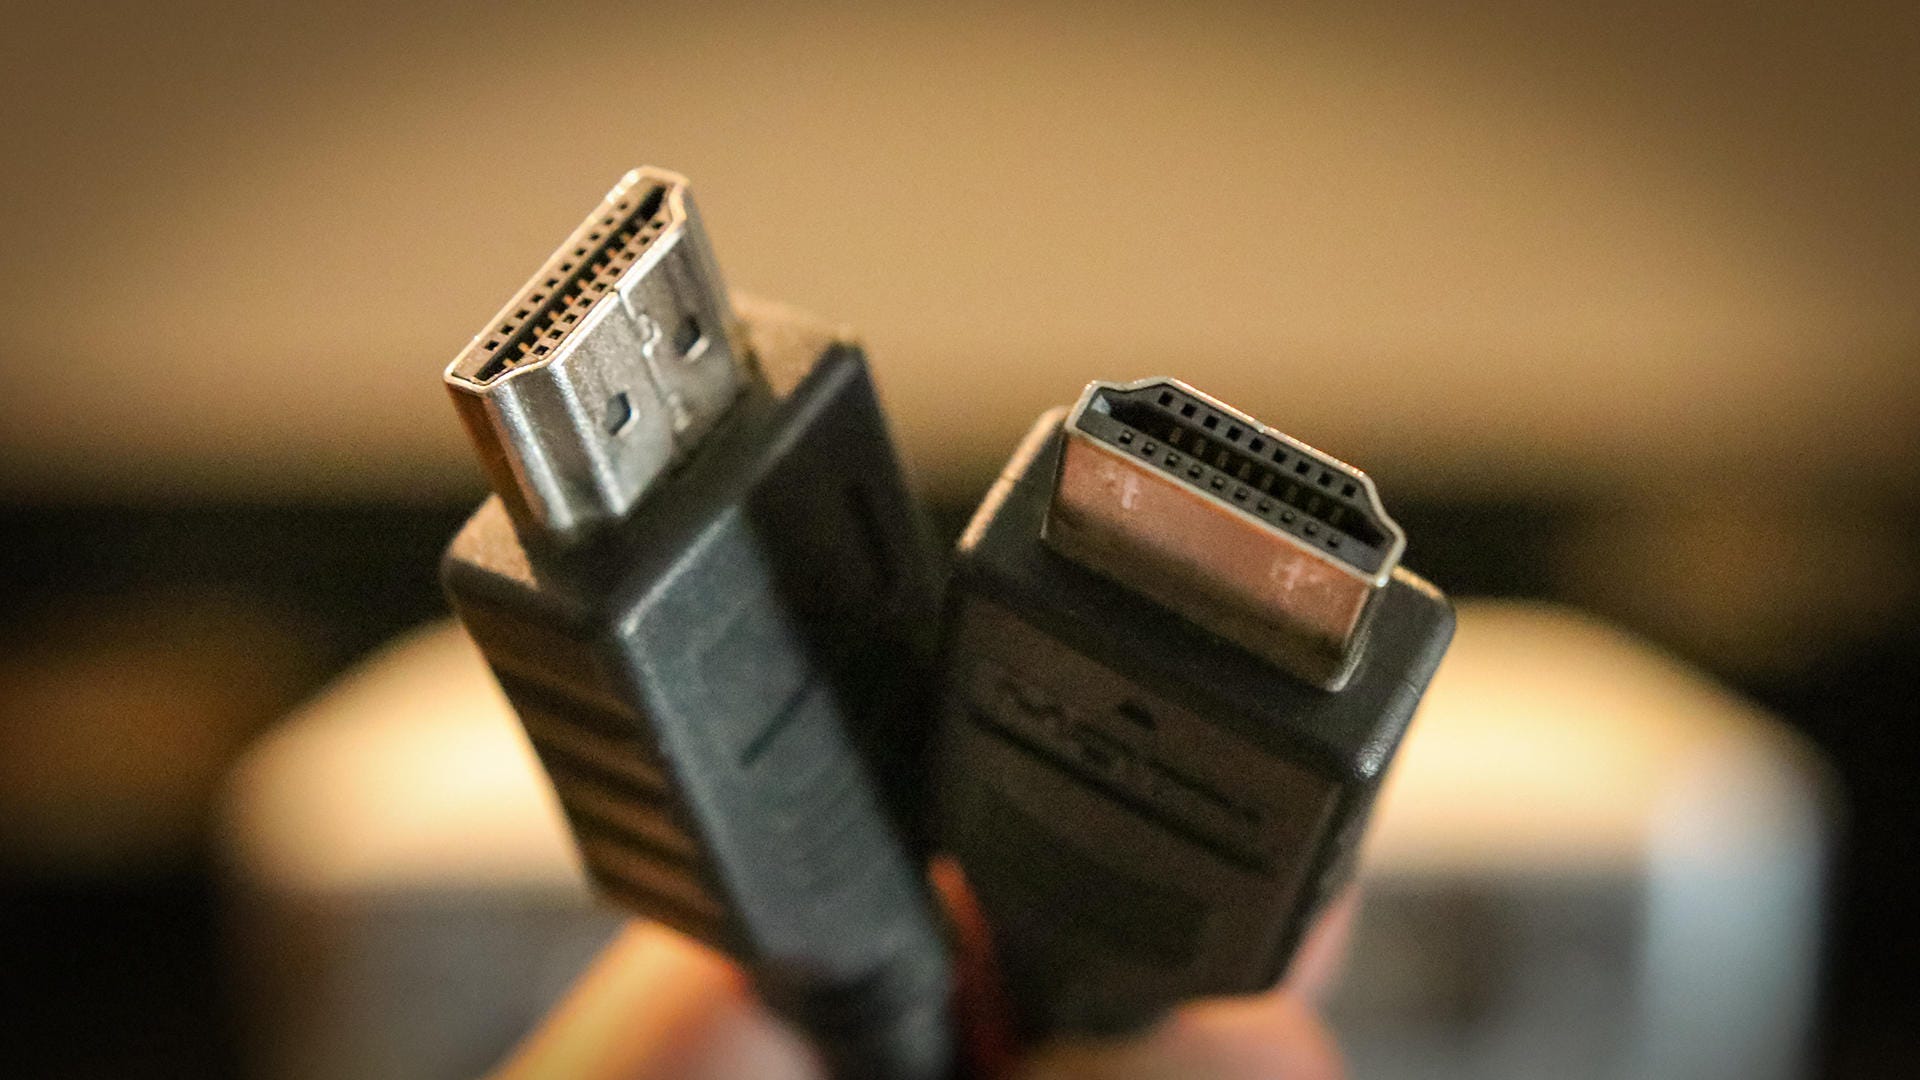 HDMI 2.1 is here, but don't worry about it yet